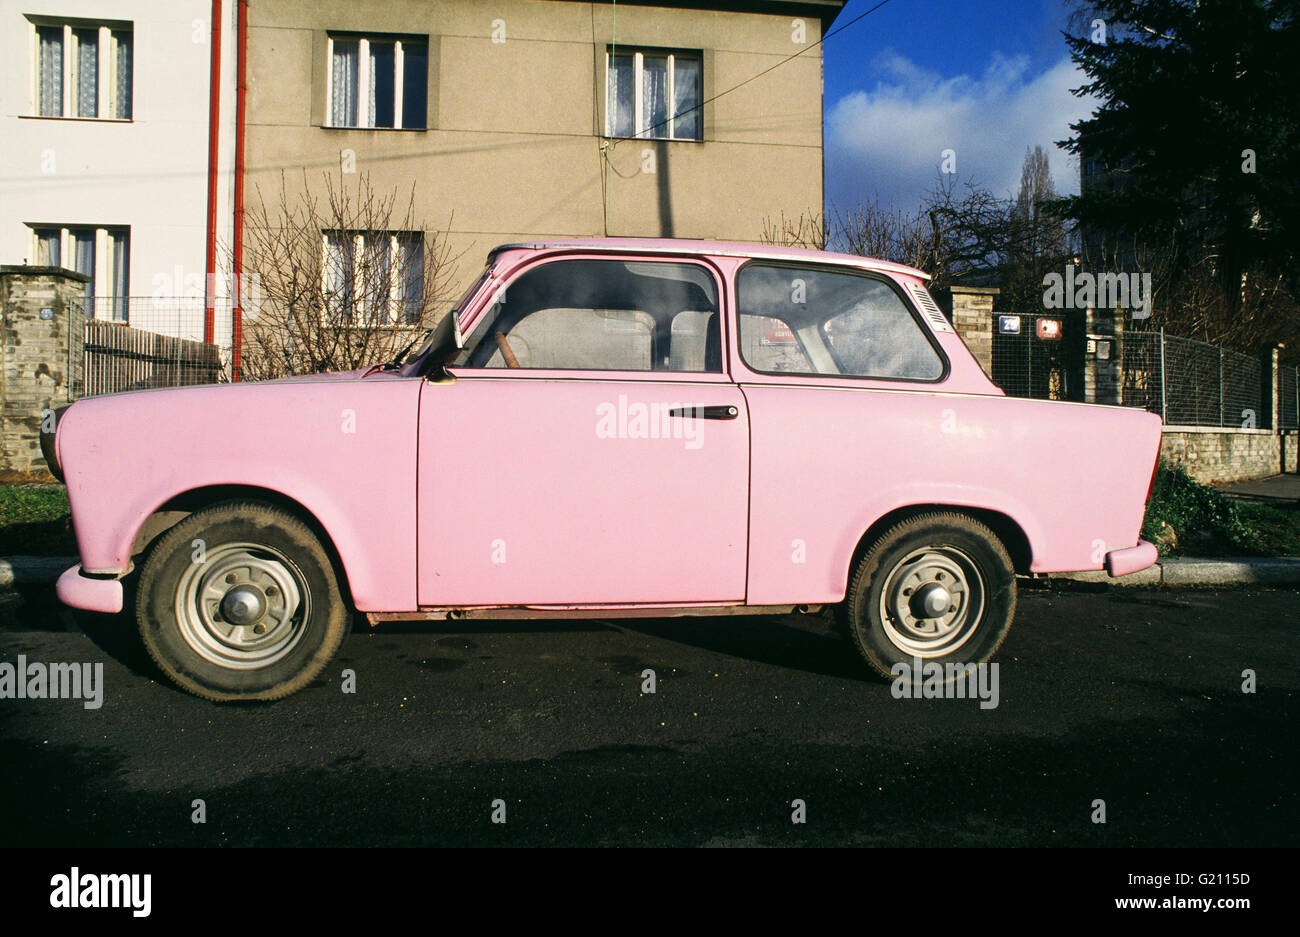 pink-trabant-with-body-made-of-plastic-and-featuring-two-stroke-engine-G2115D.jpg